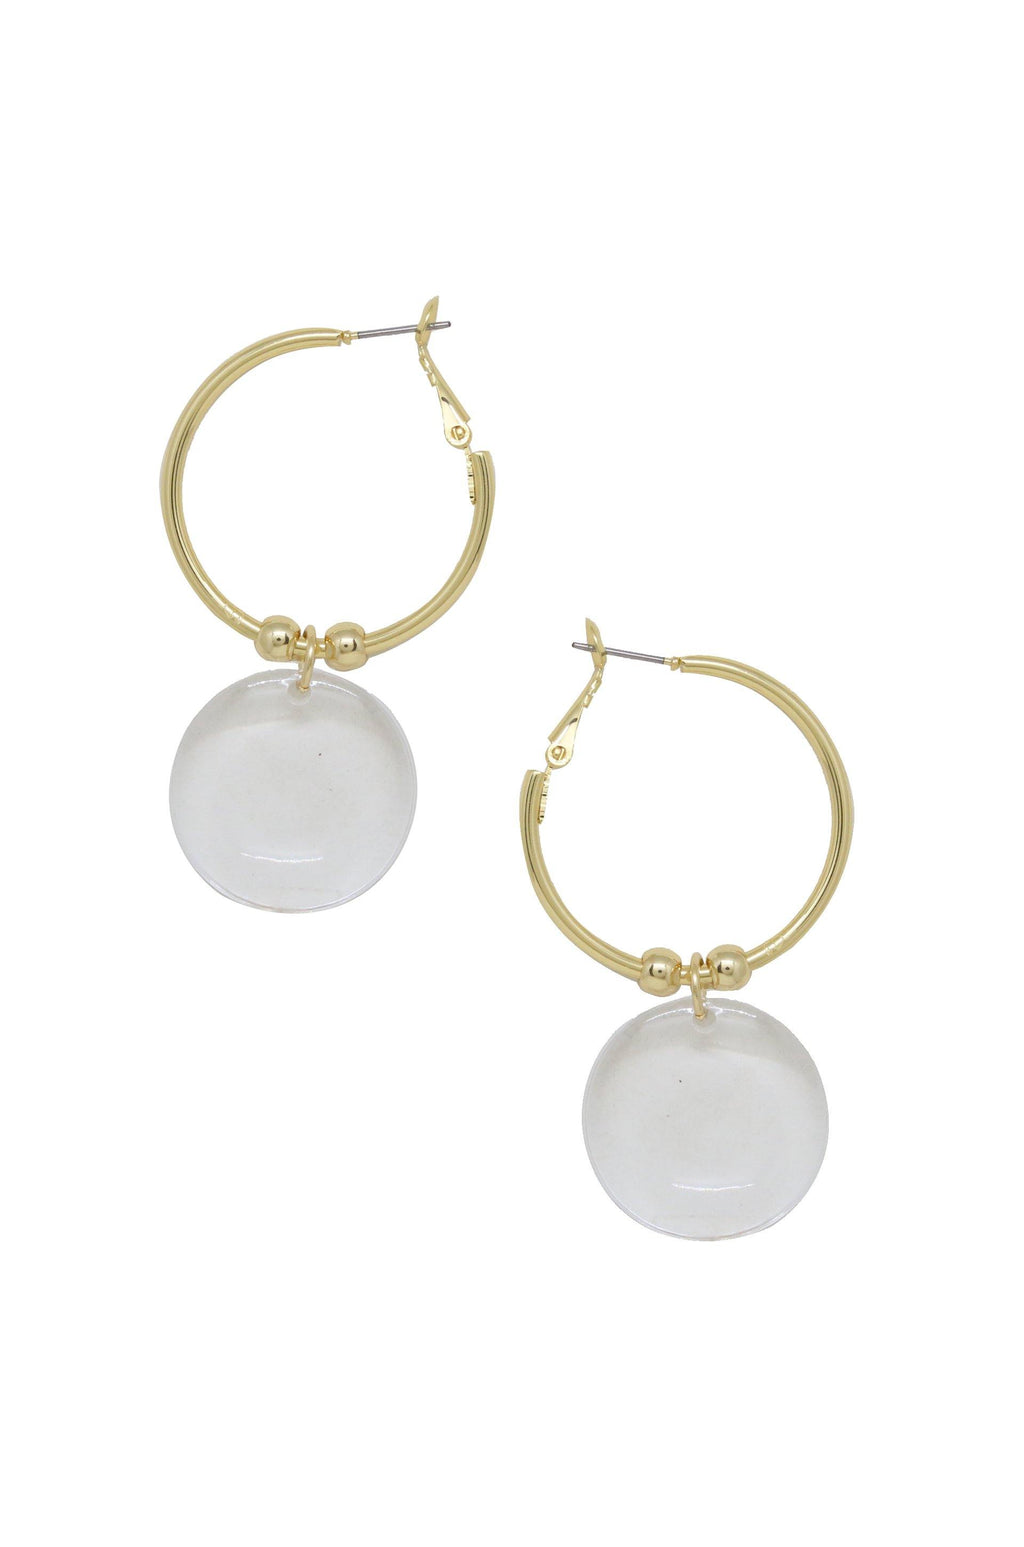 Clear Resin Circle Hoop 18k Gold Plated Earrings - The Gallant Way